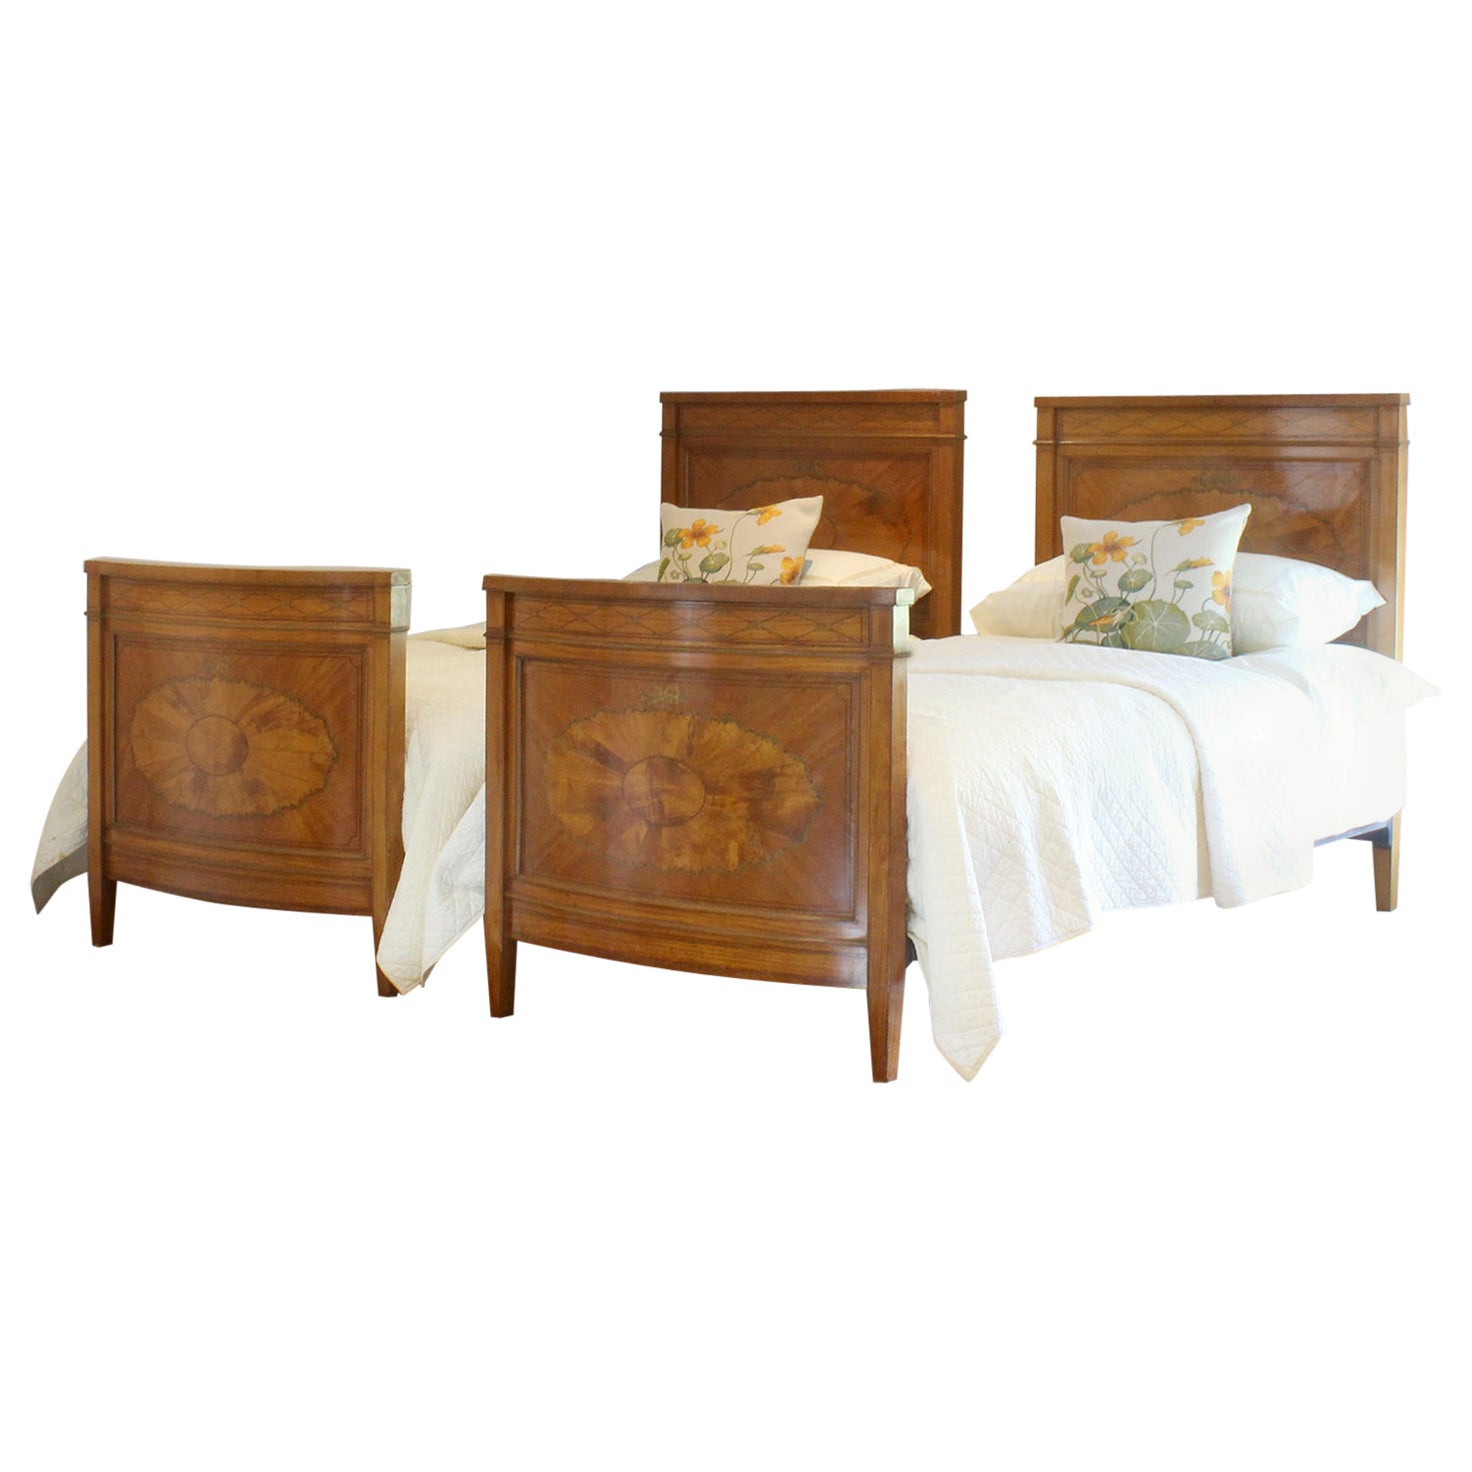 Matching Pair of Satinwood Marquetry Beds, WP44